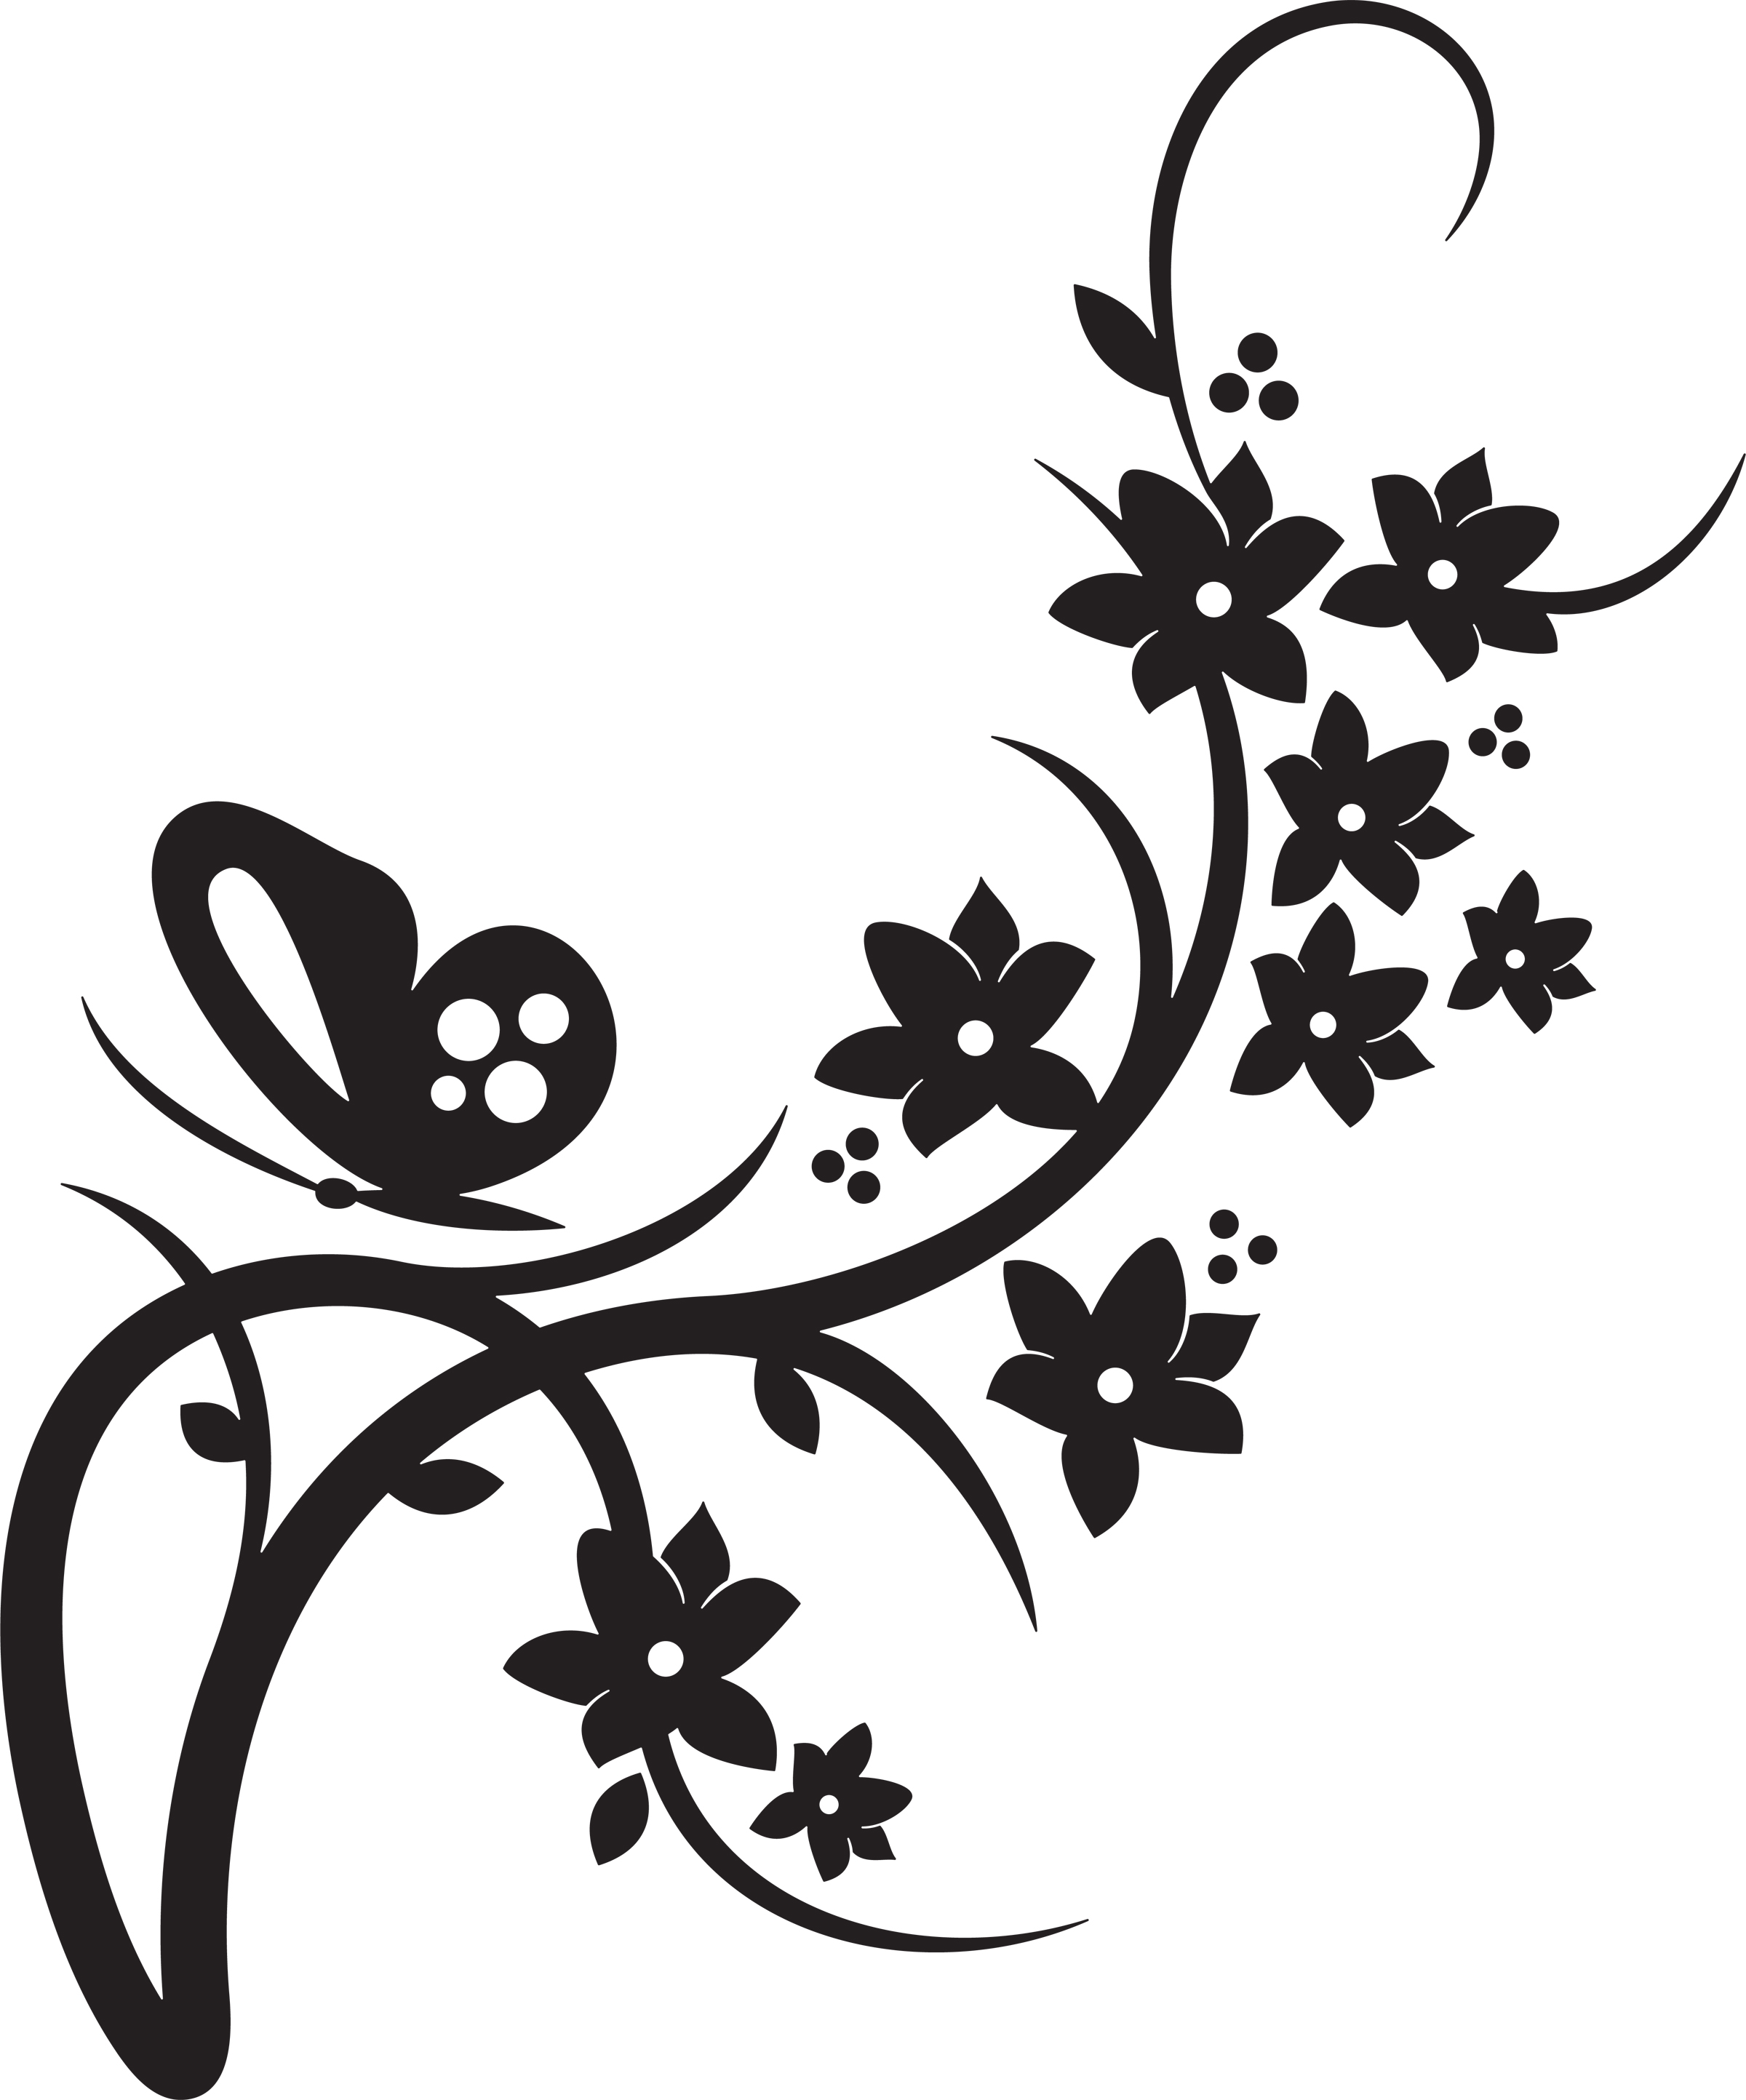 wedding clip art black and wh - Wedding Clipart Black And White